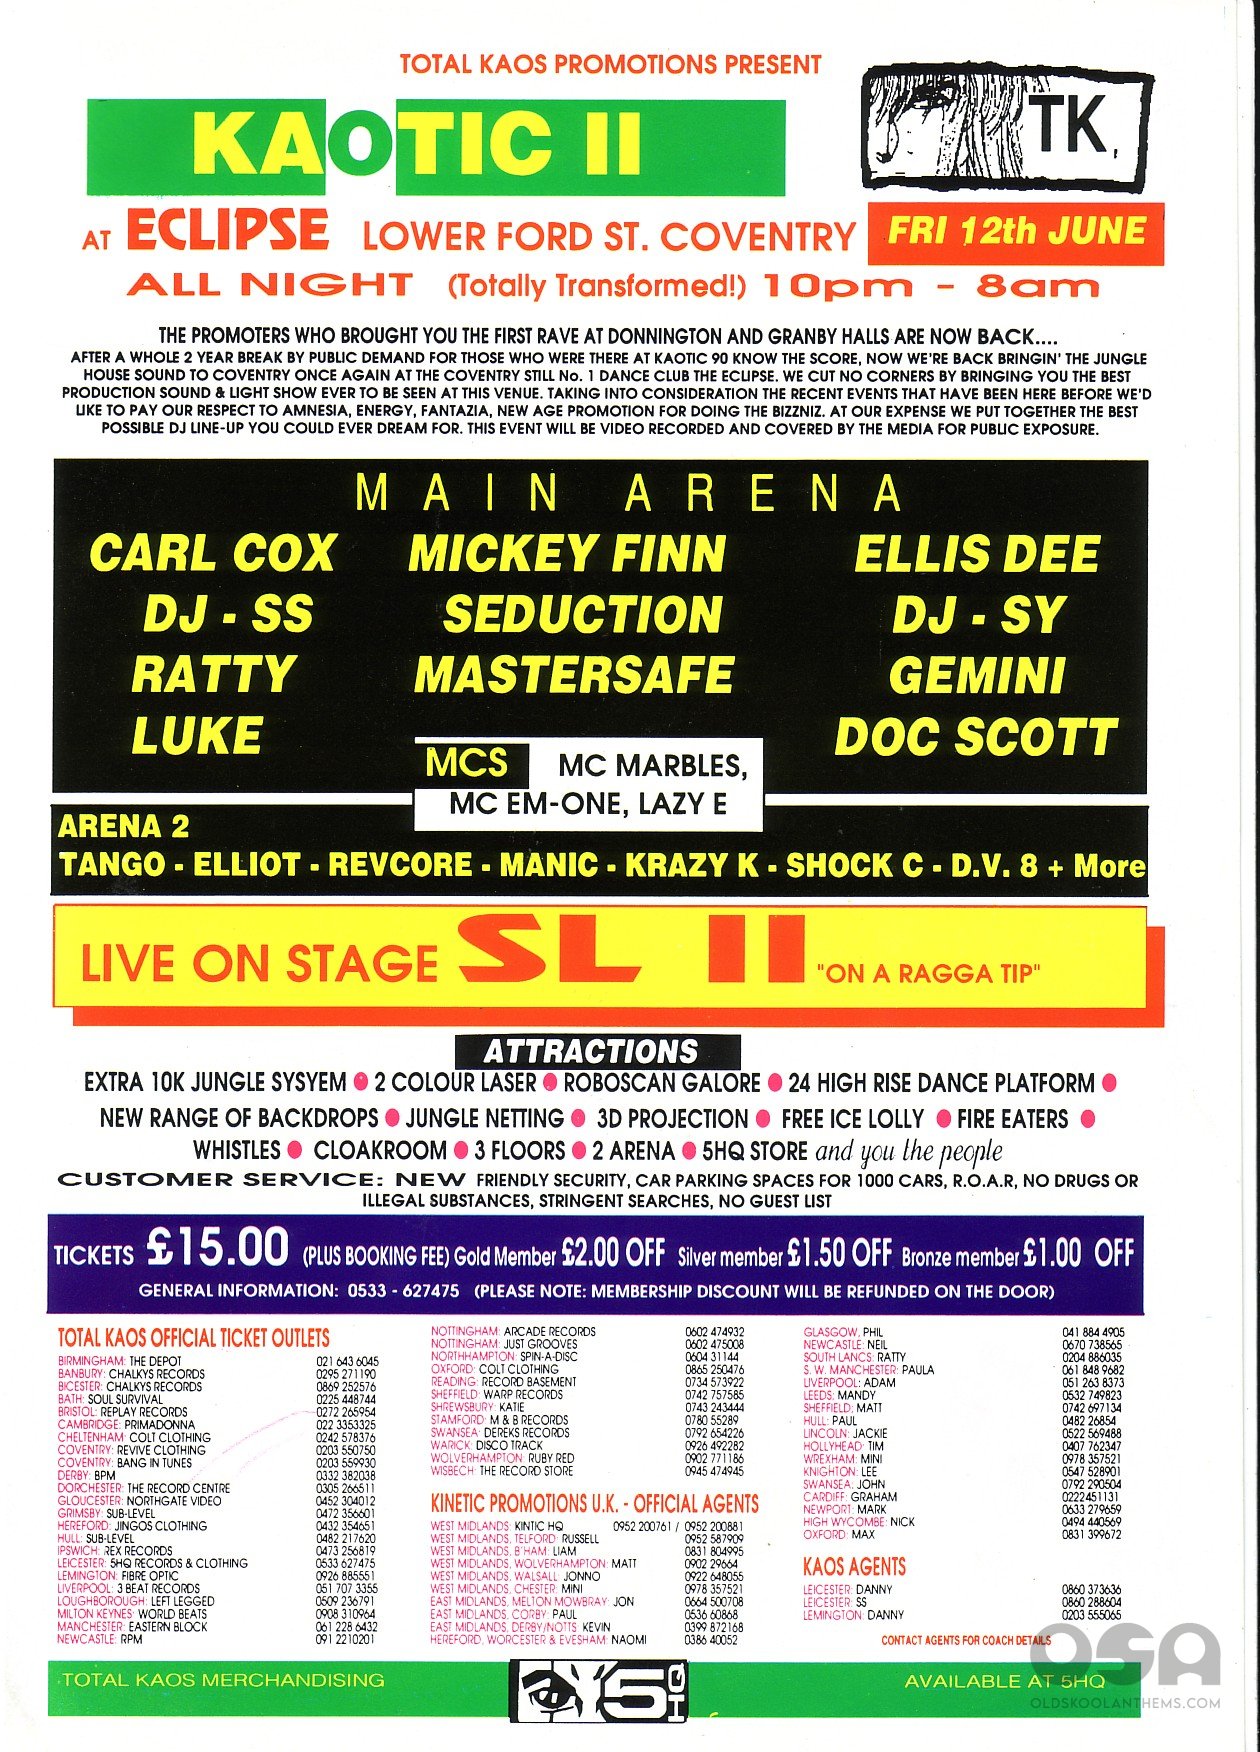 1_Total_Kaos_Presents_Kaotic_II___Eclipse_Coventry_Fri_12th_June_rear_view.jpg